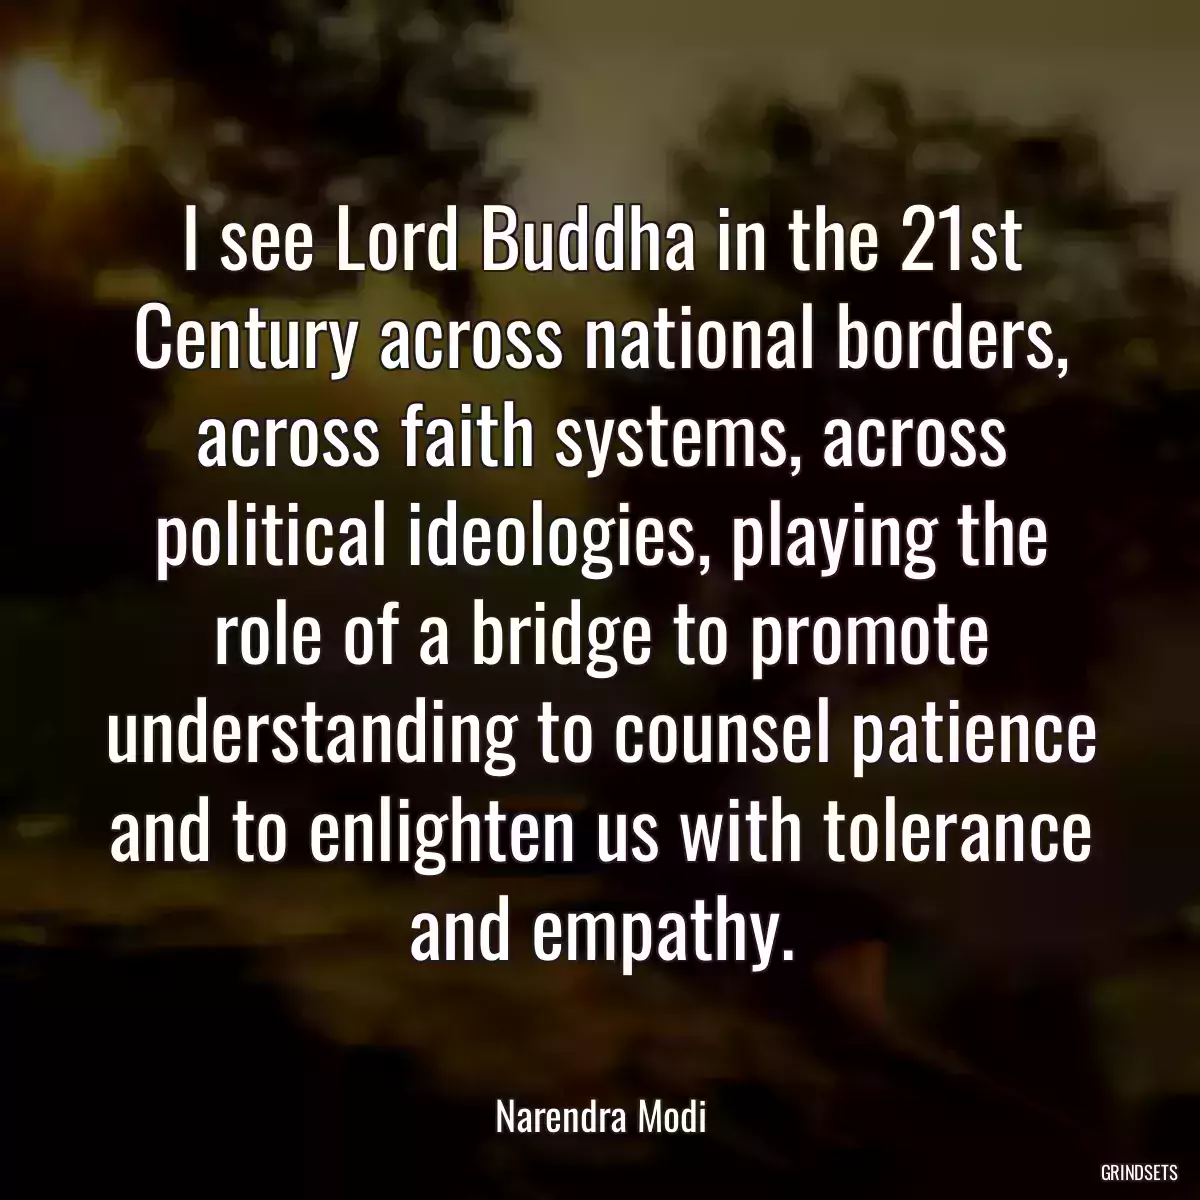 I see Lord Buddha in the 21st Century across national borders, across faith systems, across political ideologies, playing the role of a bridge to promote understanding to counsel patience and to enlighten us with tolerance and empathy.